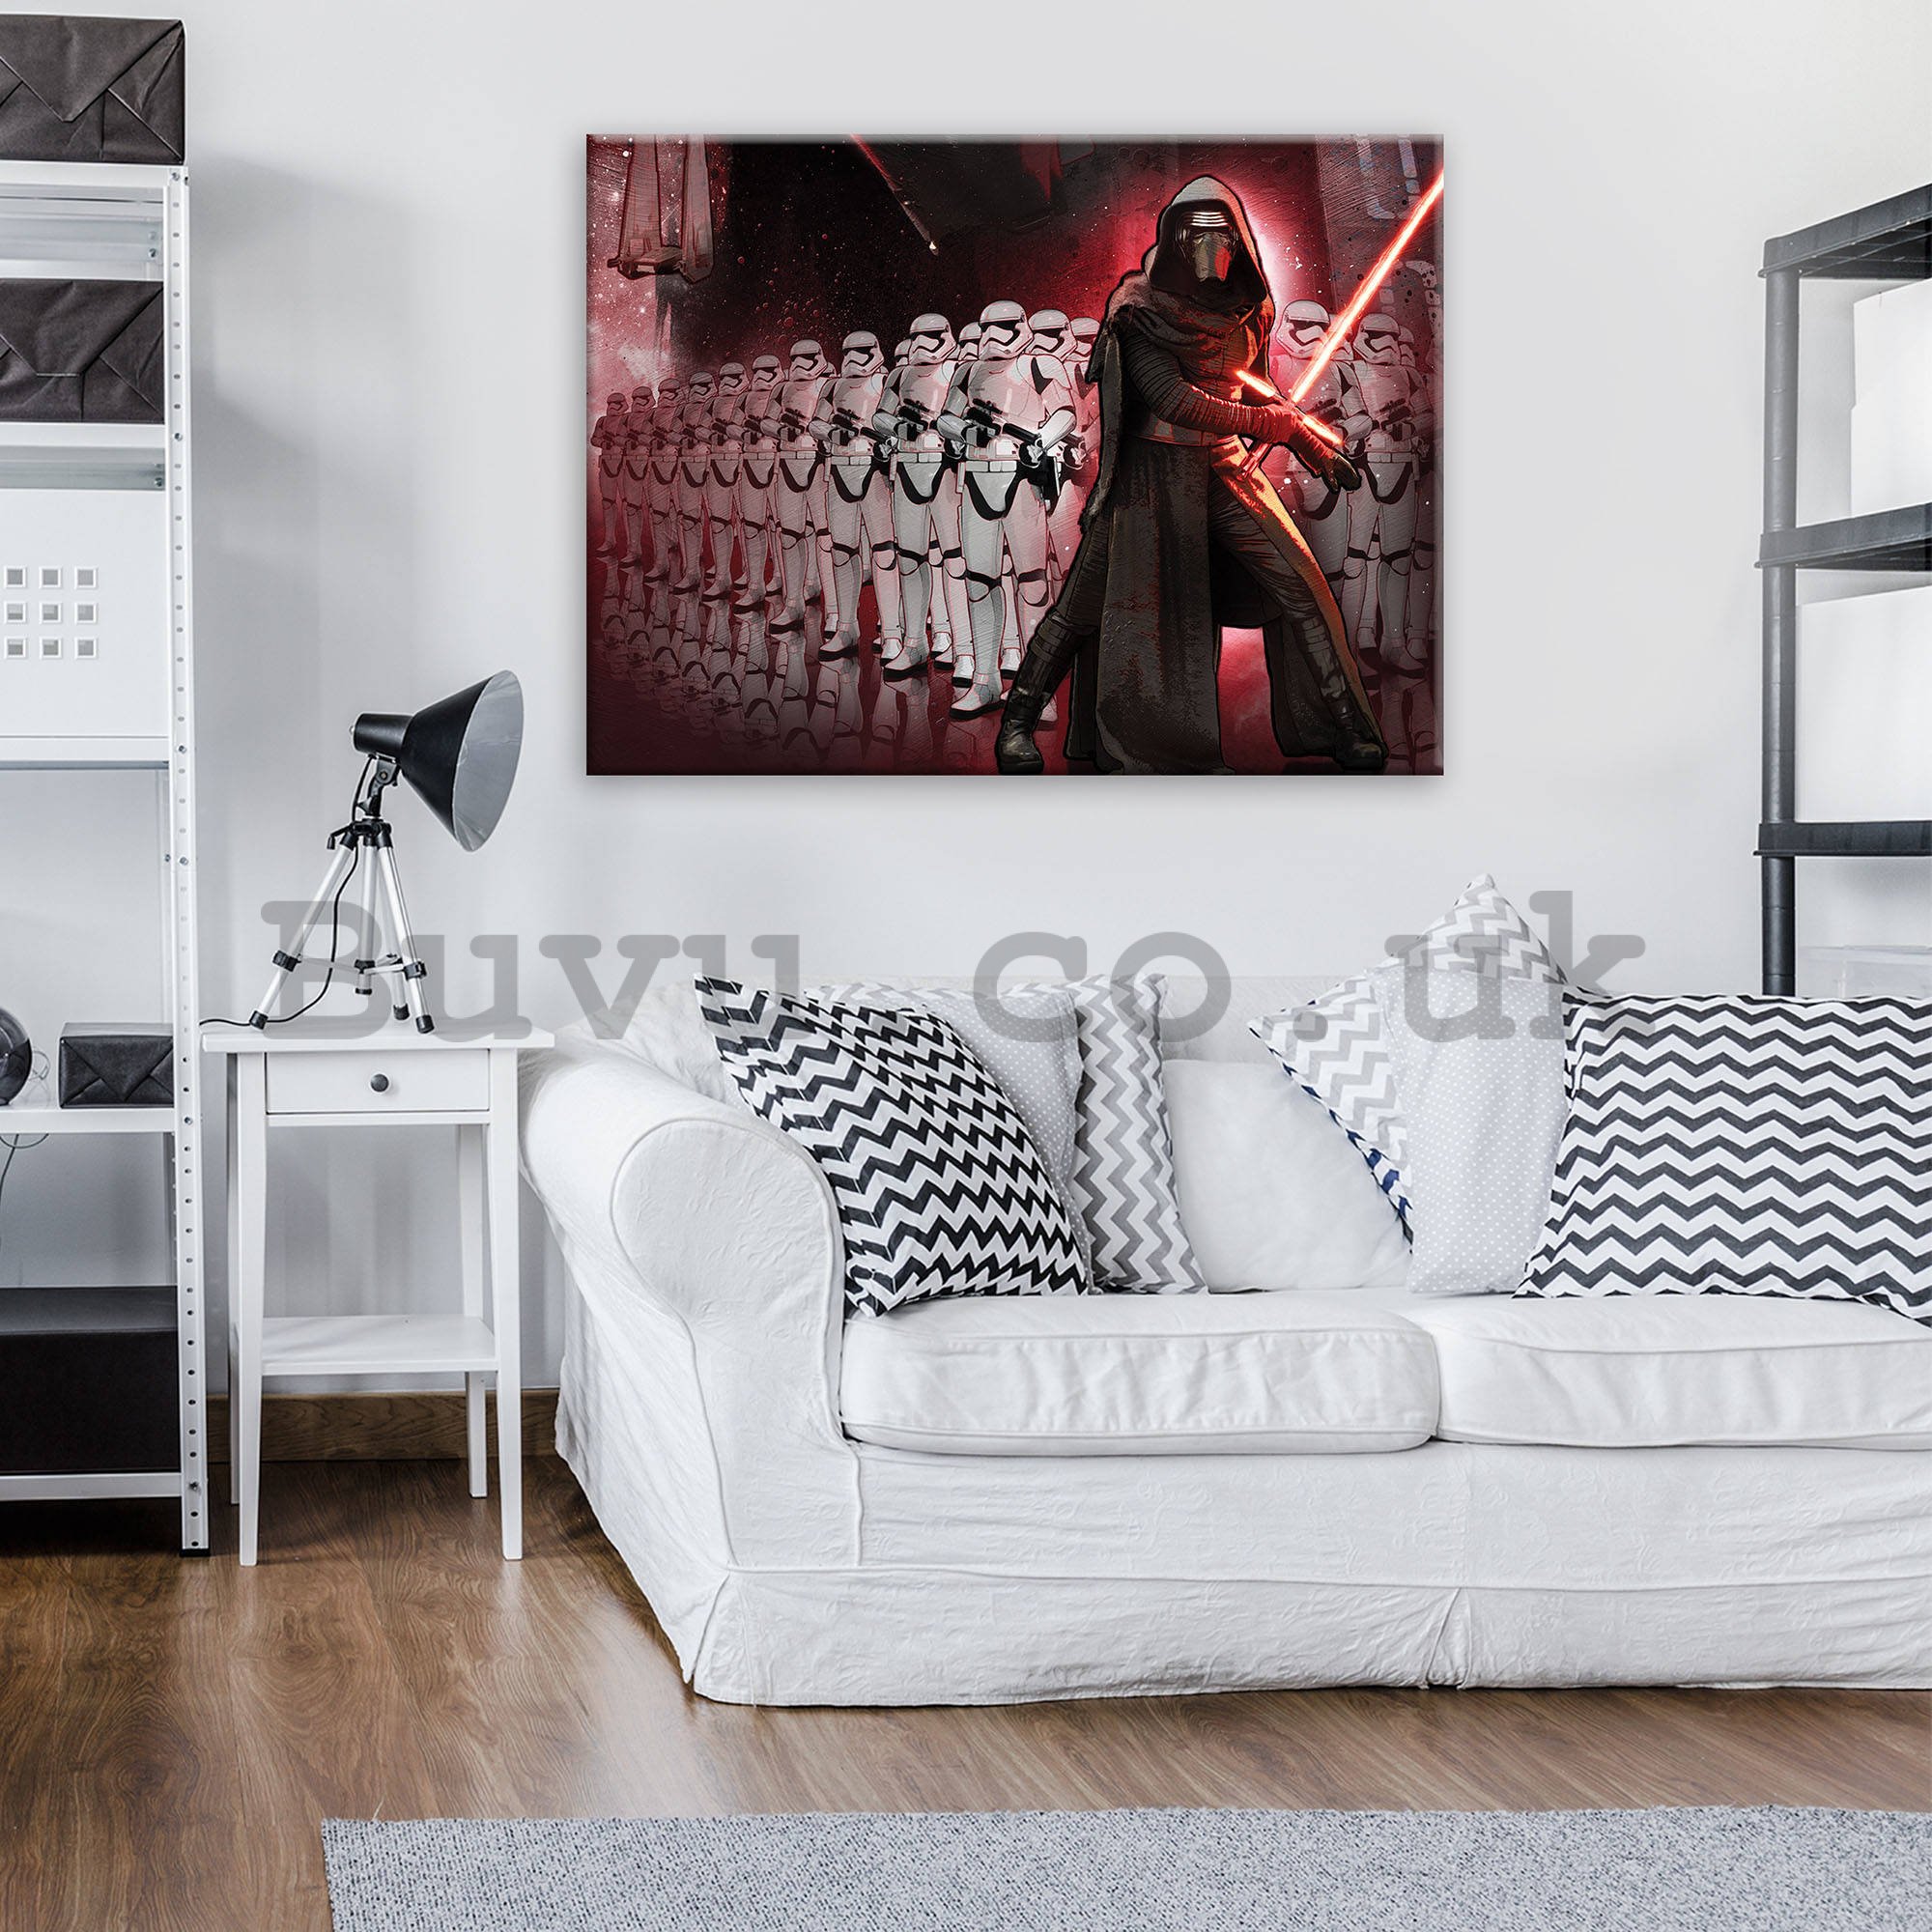 Painting on canvas: Star Wars First Order (1) - 100x75 cm